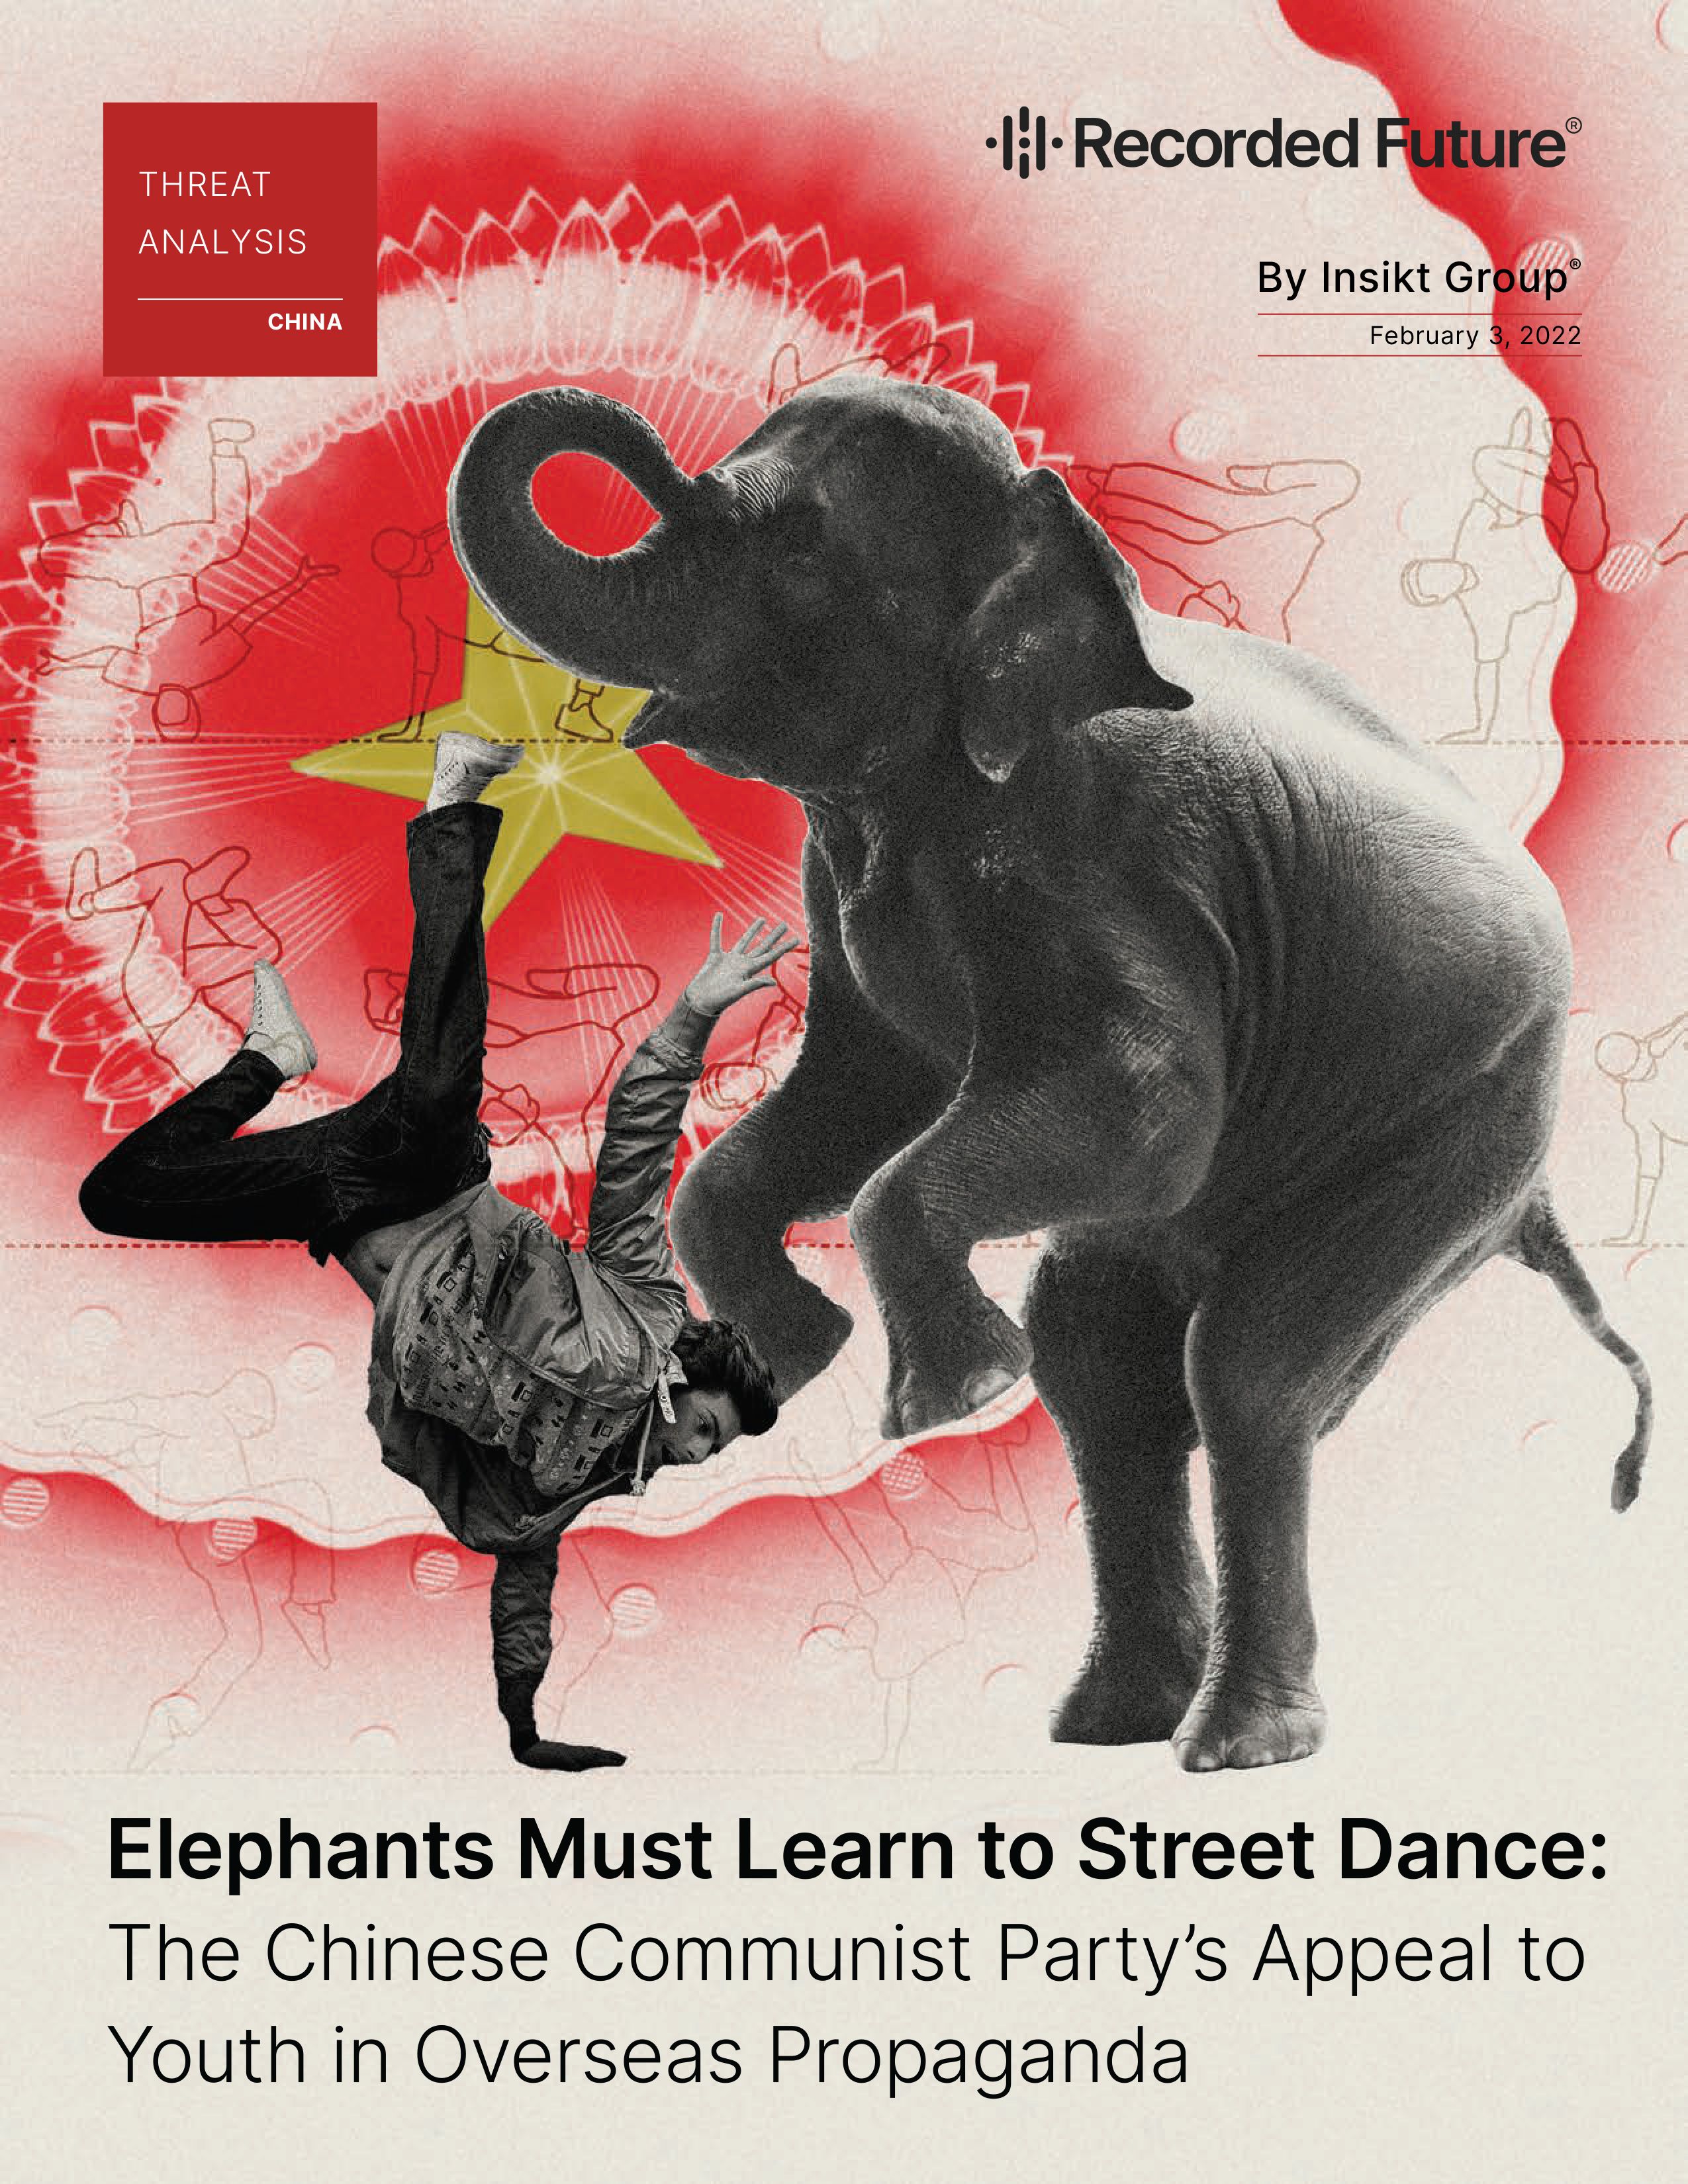 Elephants Must Learn to Street Dance: The Chinese Communist Party’s Appeal to Youth in Overseas Propaganda